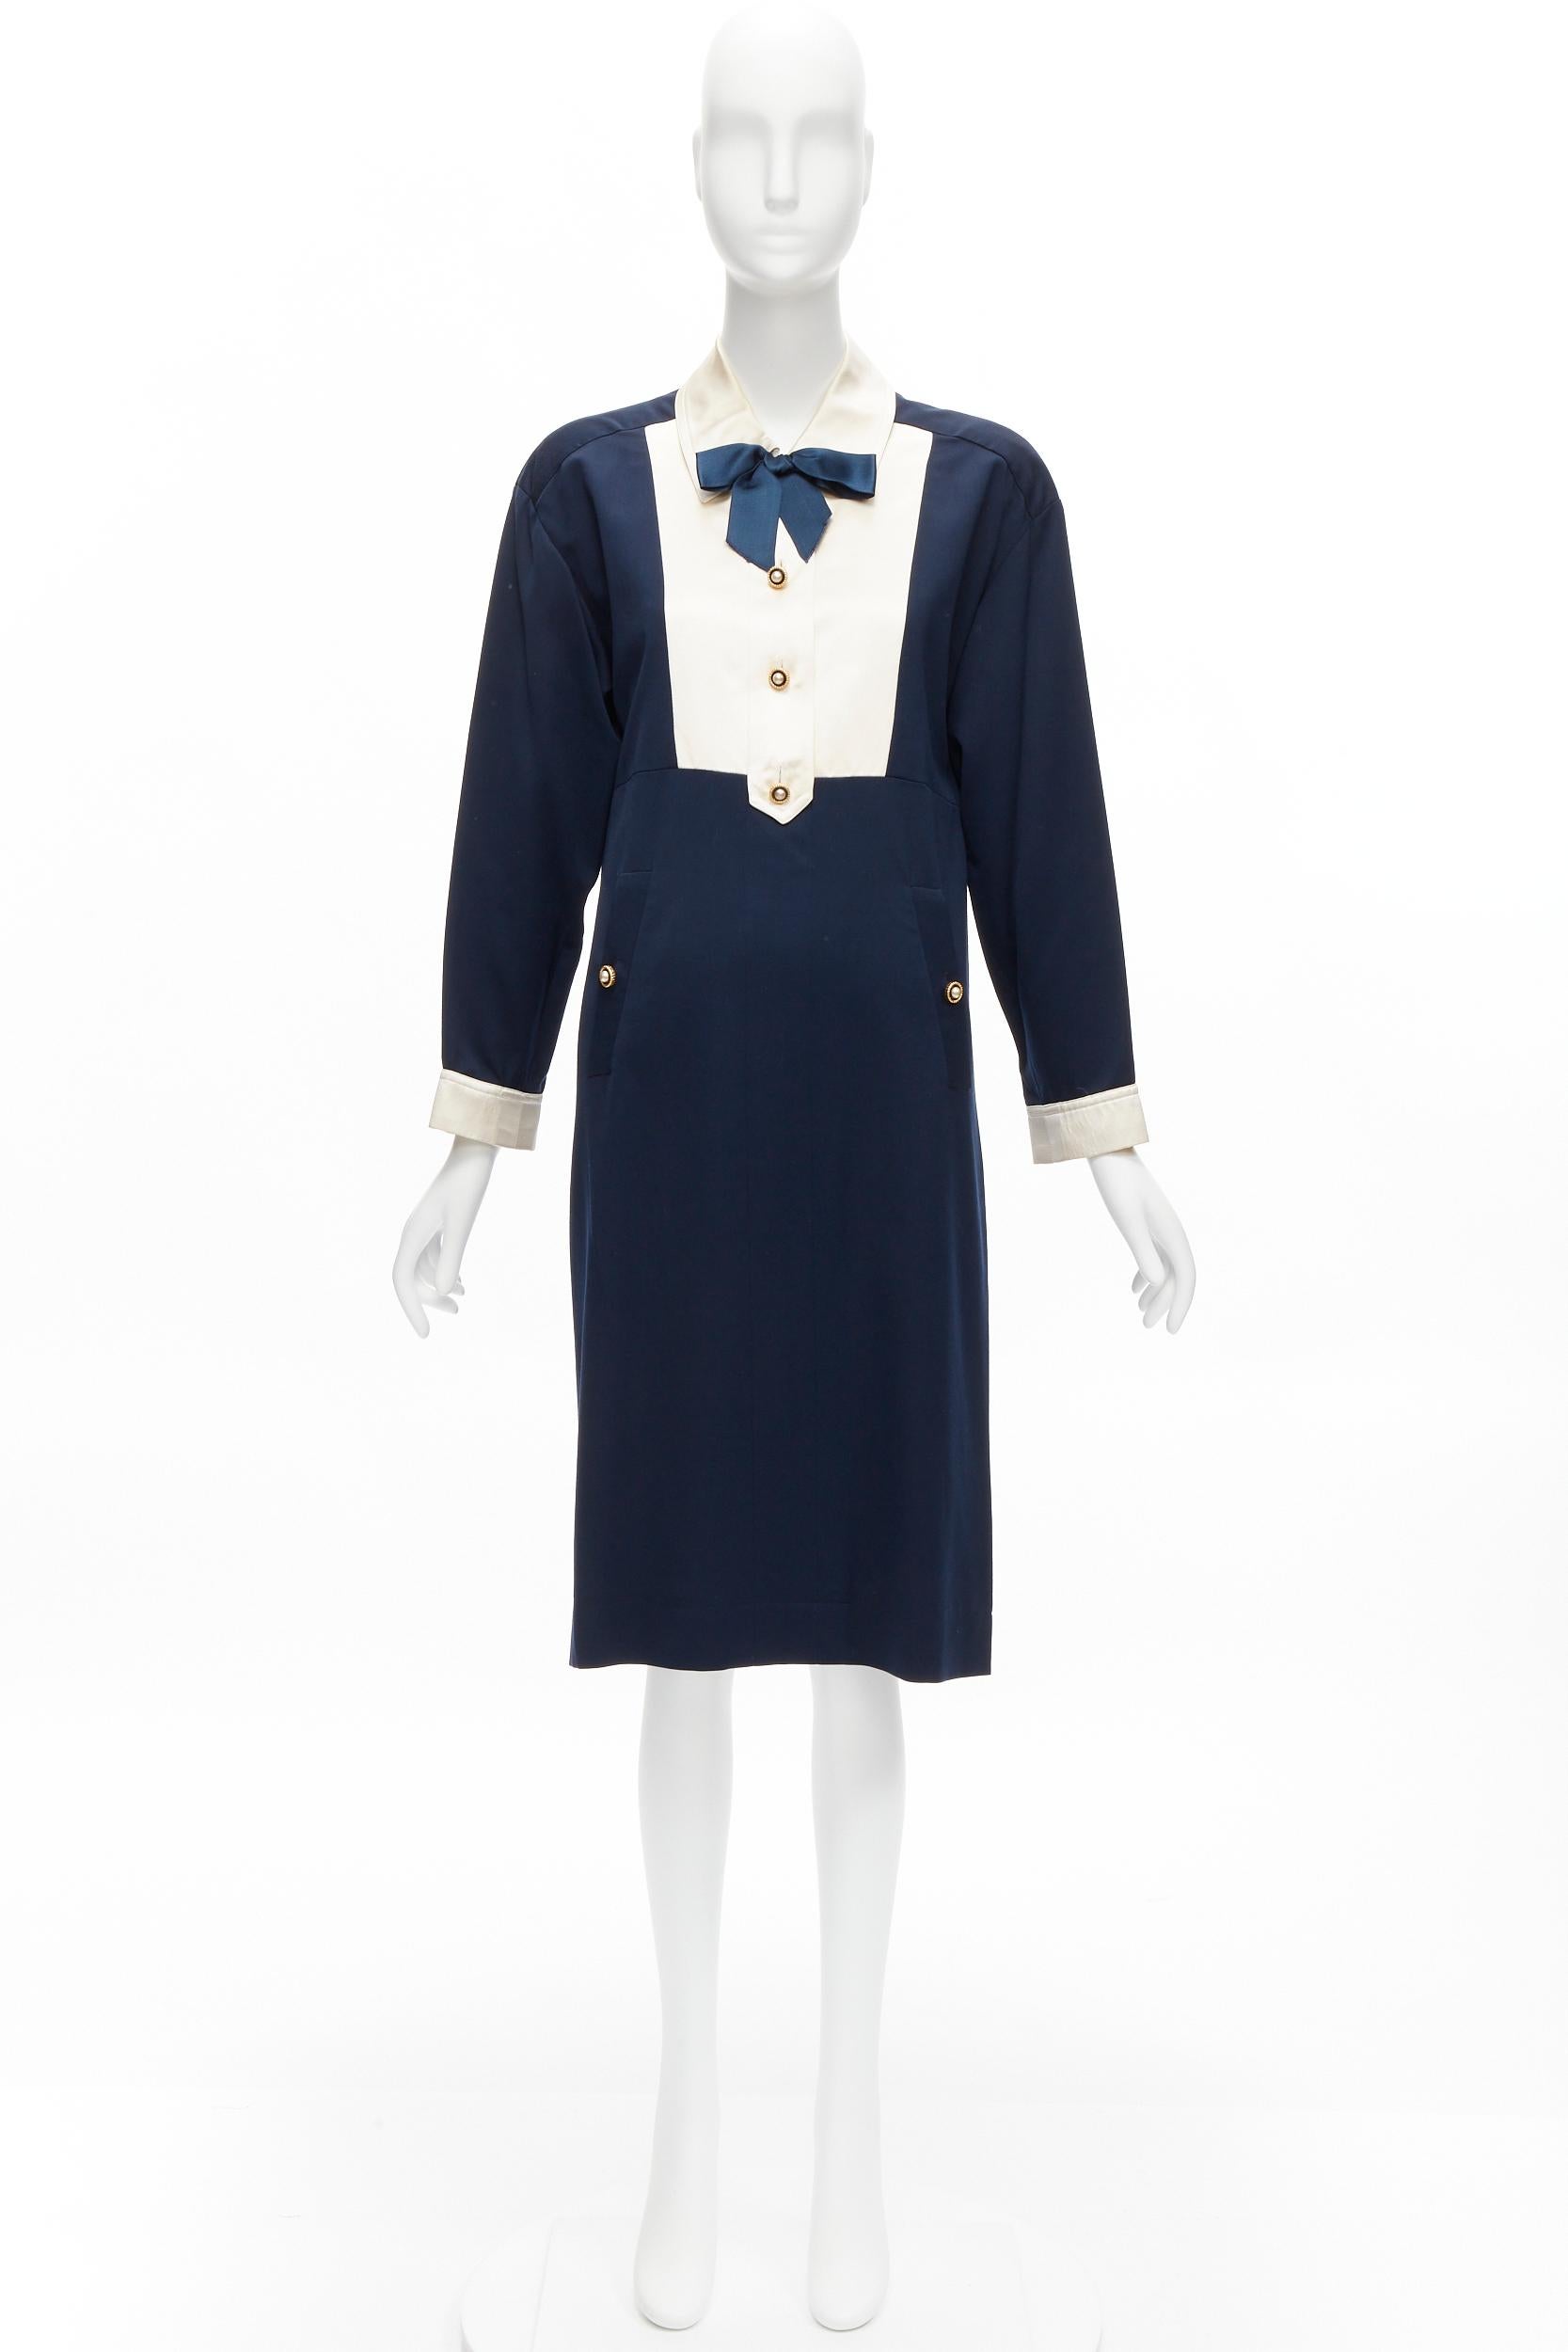 CHANEL Vintage gold pearl button cream navy two tone wool silk dress FR36 S For Sale 7